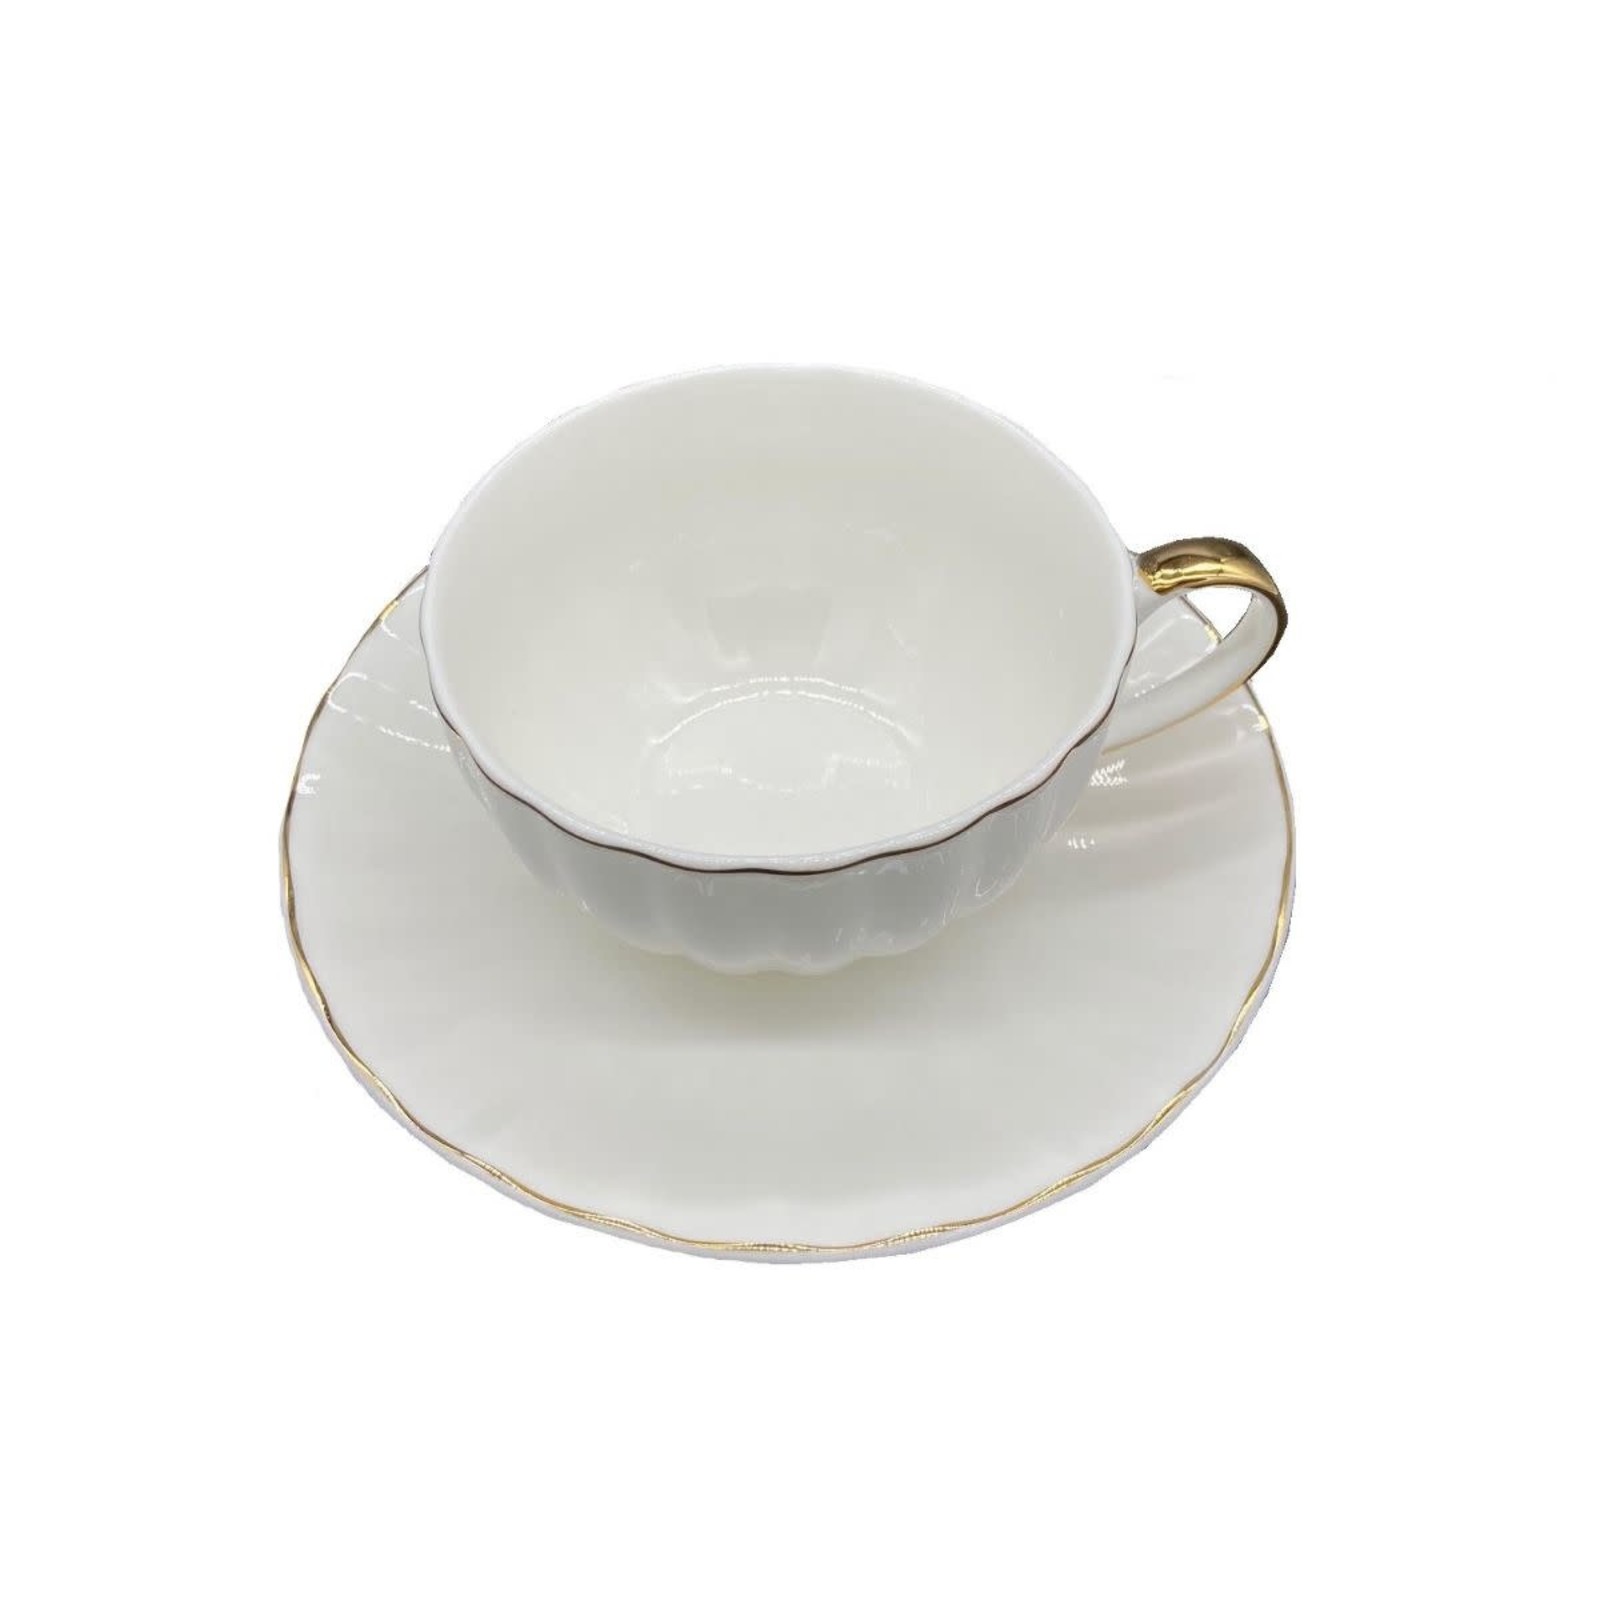 The Gallery BTaT  Espresso Cup and Saucer  WTC4860391001549 loading=